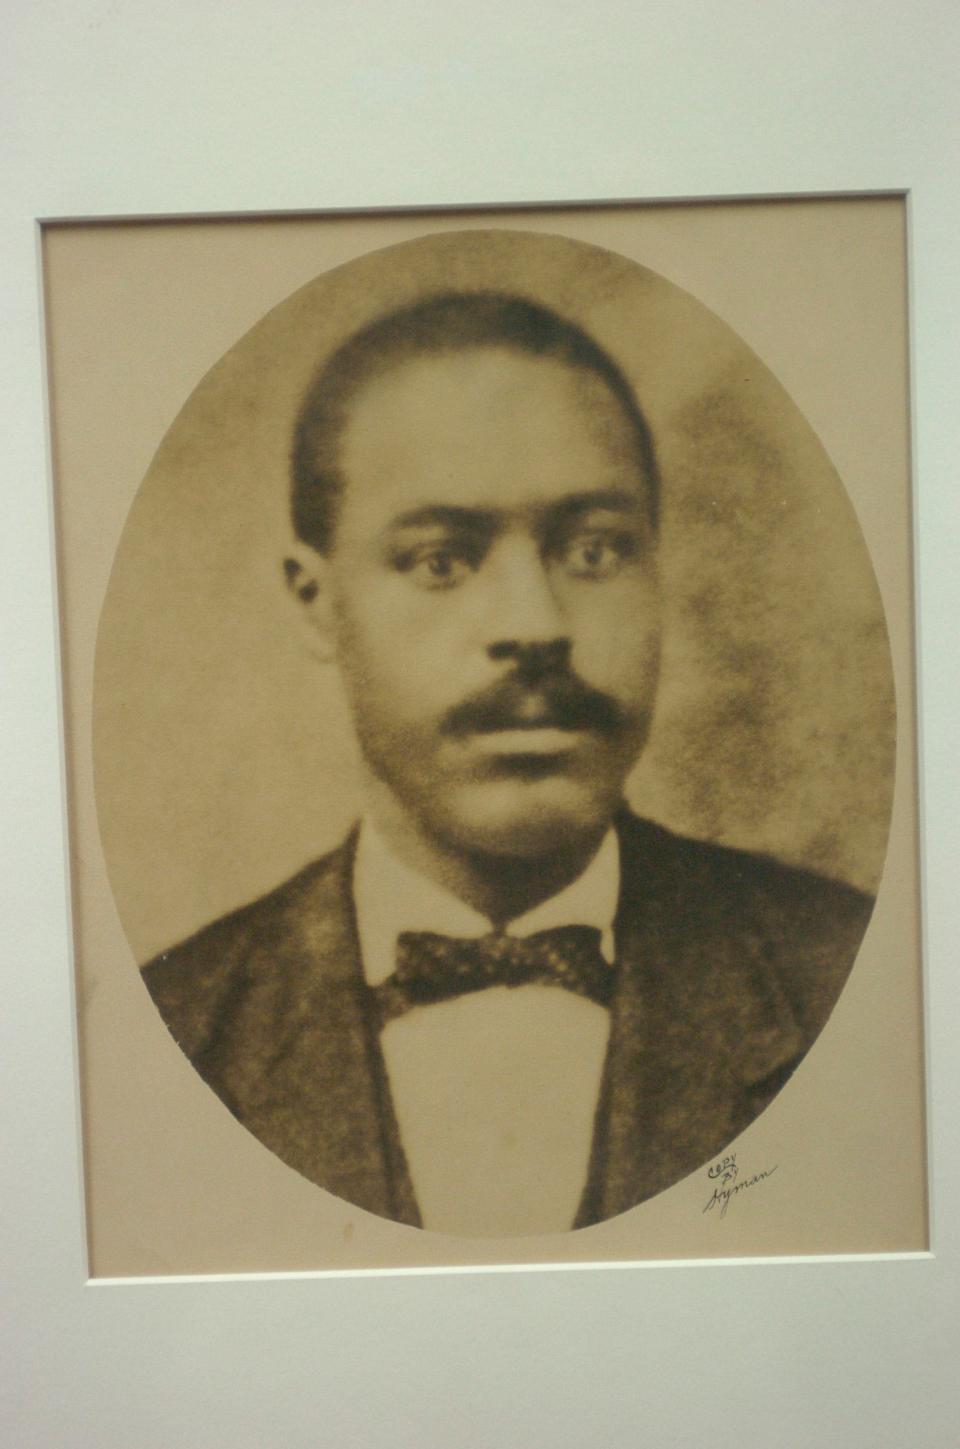 James Francis Shober, the state's first Black doctor, was licensed in 1878 and had an office in Wilmington.